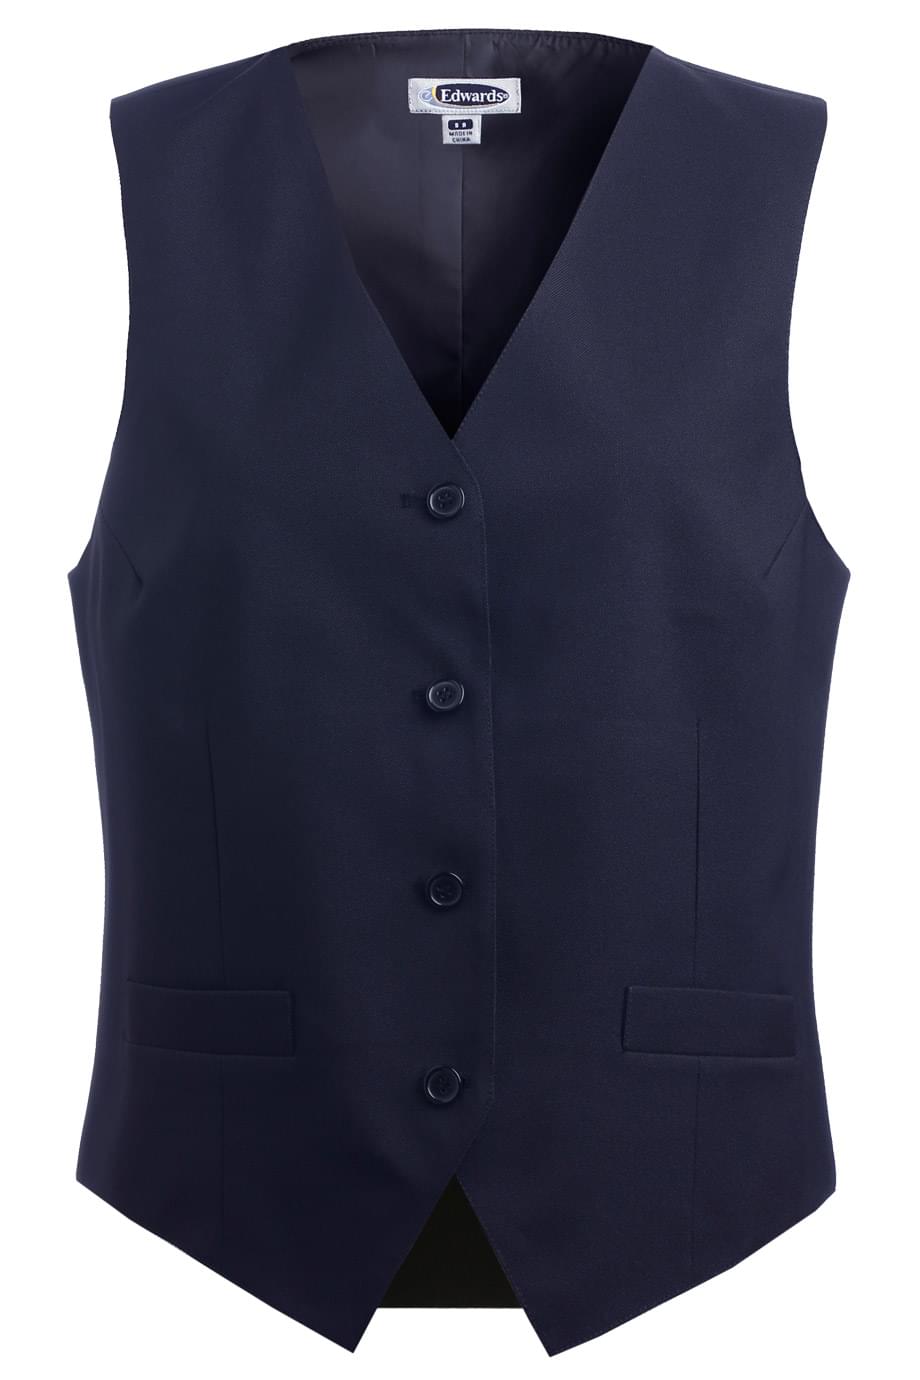 Edwards XS Ladies' Navy Essential Polyester Vest (4 Buttons)